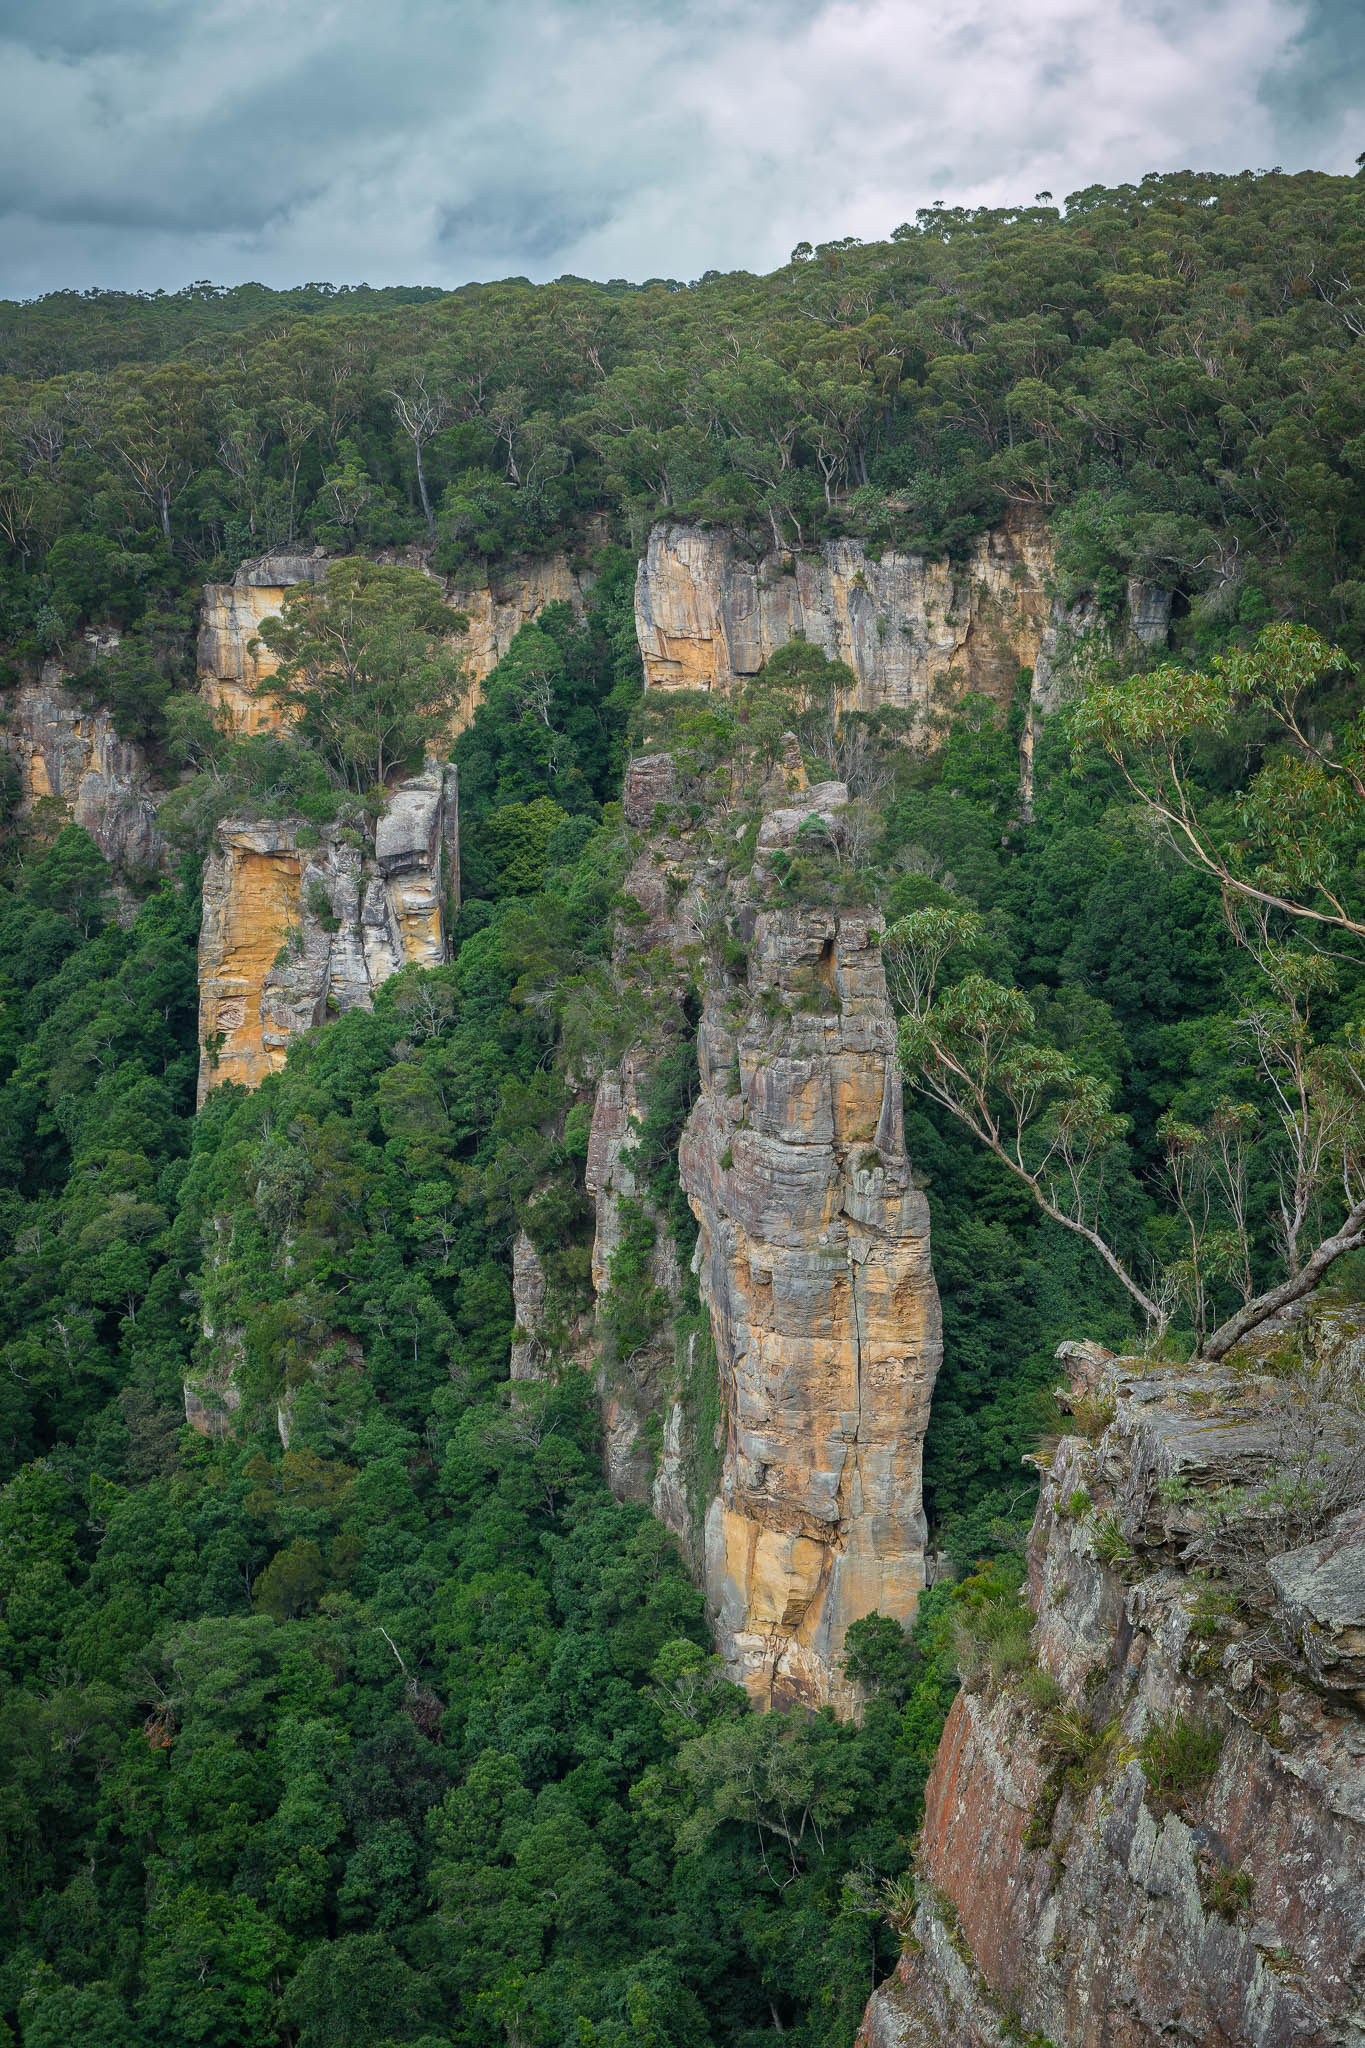 Image of spectular rock formations in Kangaroo Valley, captured from an overlook near Mannings Lookout, NSW.